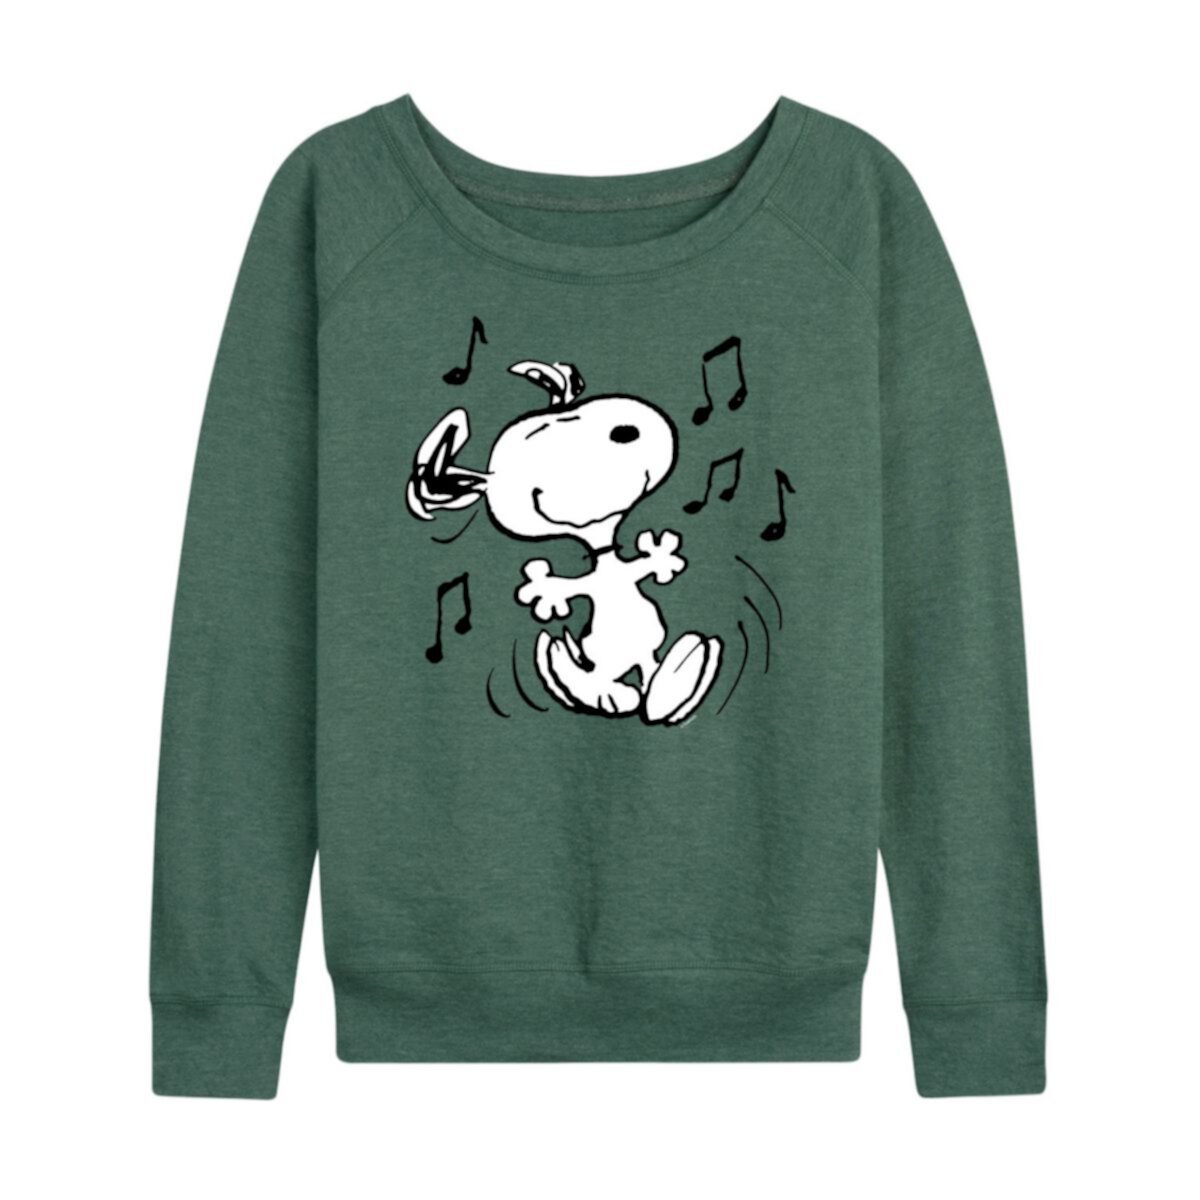 Women's Peanuts Snoopy Dancing Slouchy Graphic Sweatshirt Licensed Character